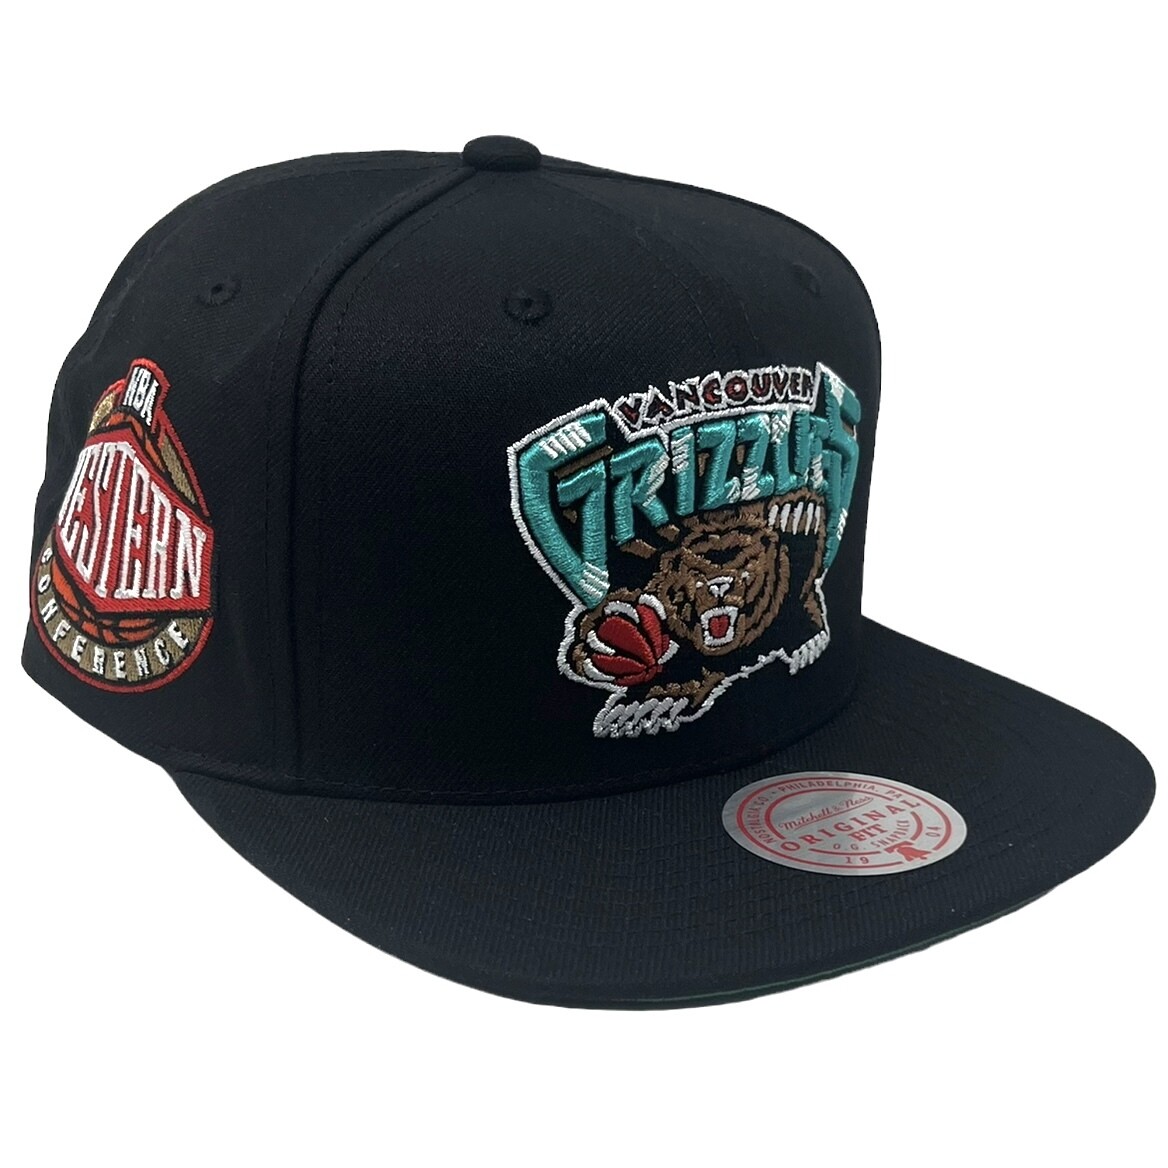 Vancouver Grizzlies HWC Wool 2 Tone NBA Snapback Hat - TEAL / One Size in  2023